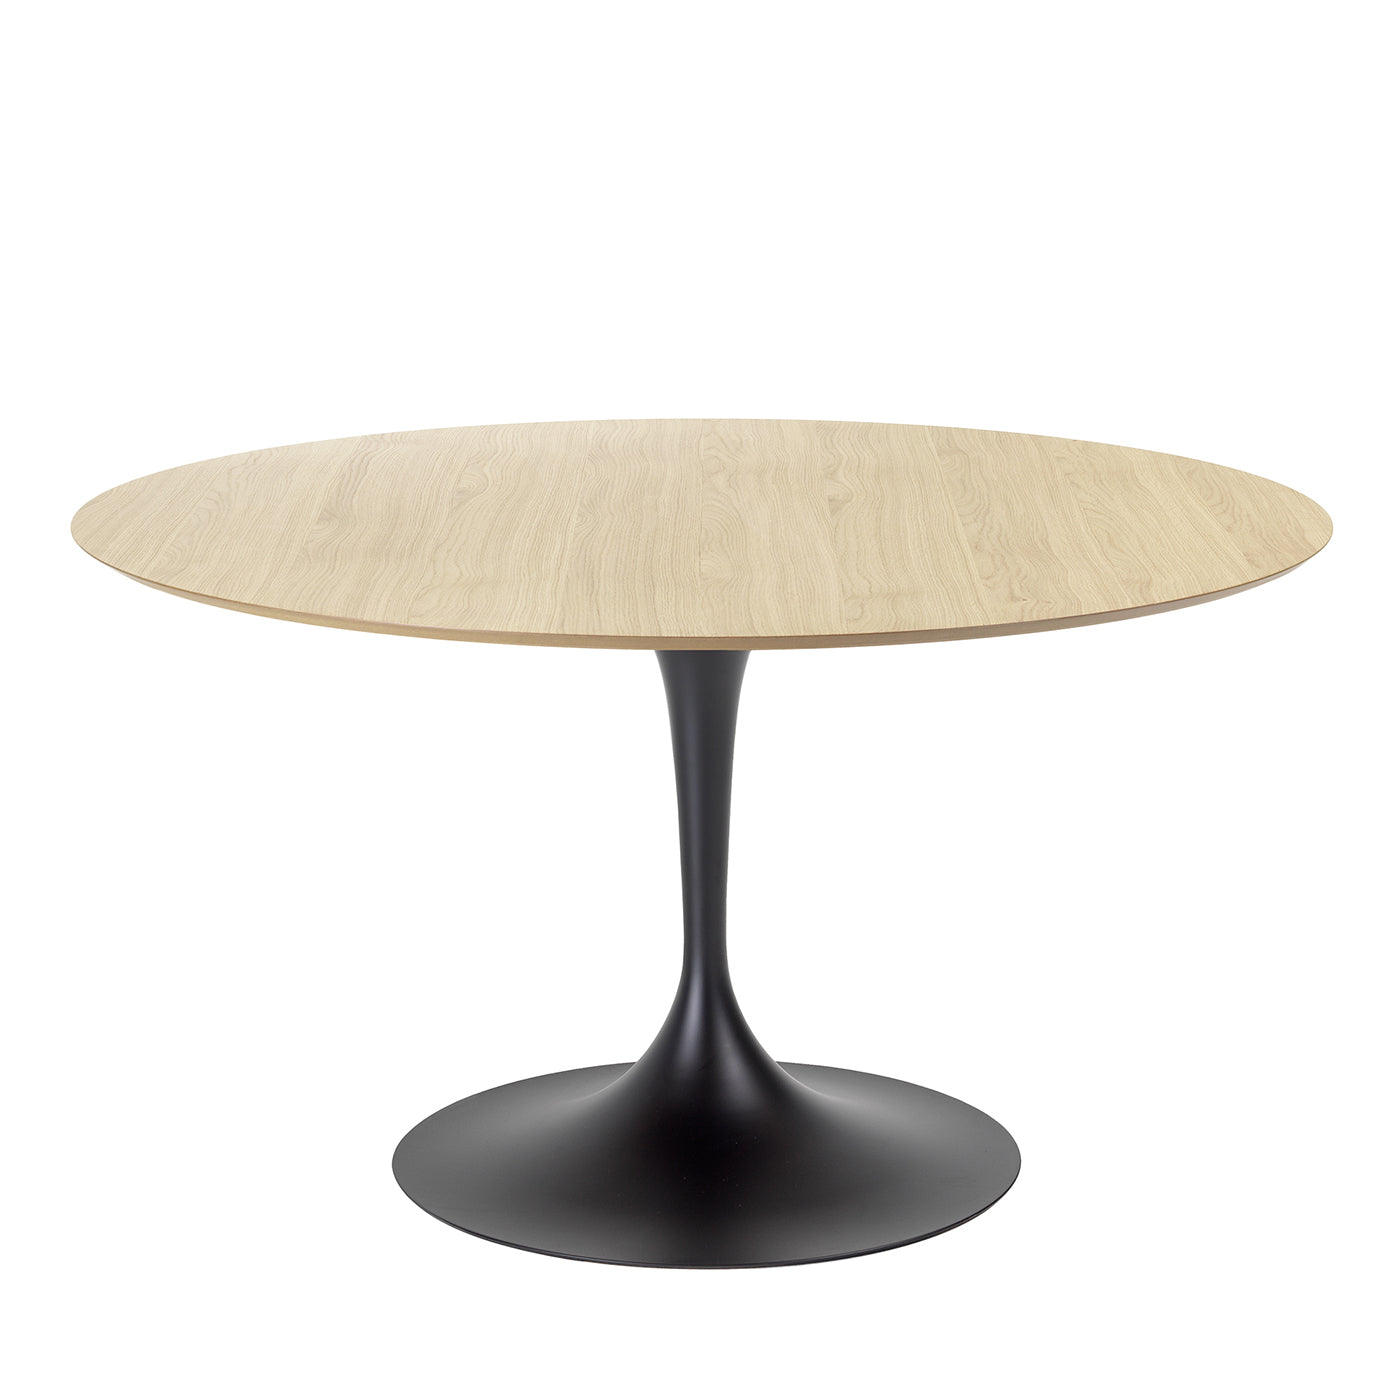 Itavolo Round Table with wooden Top - Main view